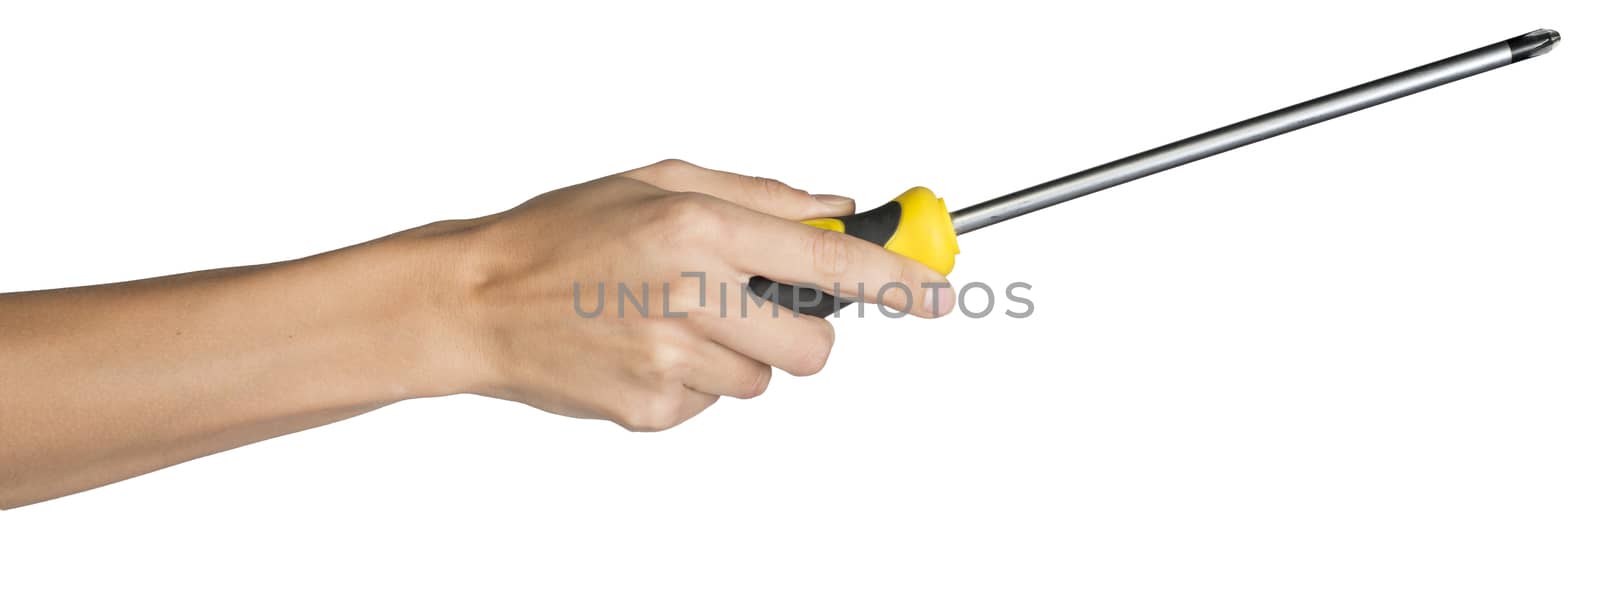 Female hand, bare, holding long screwdriver, isolated over white background